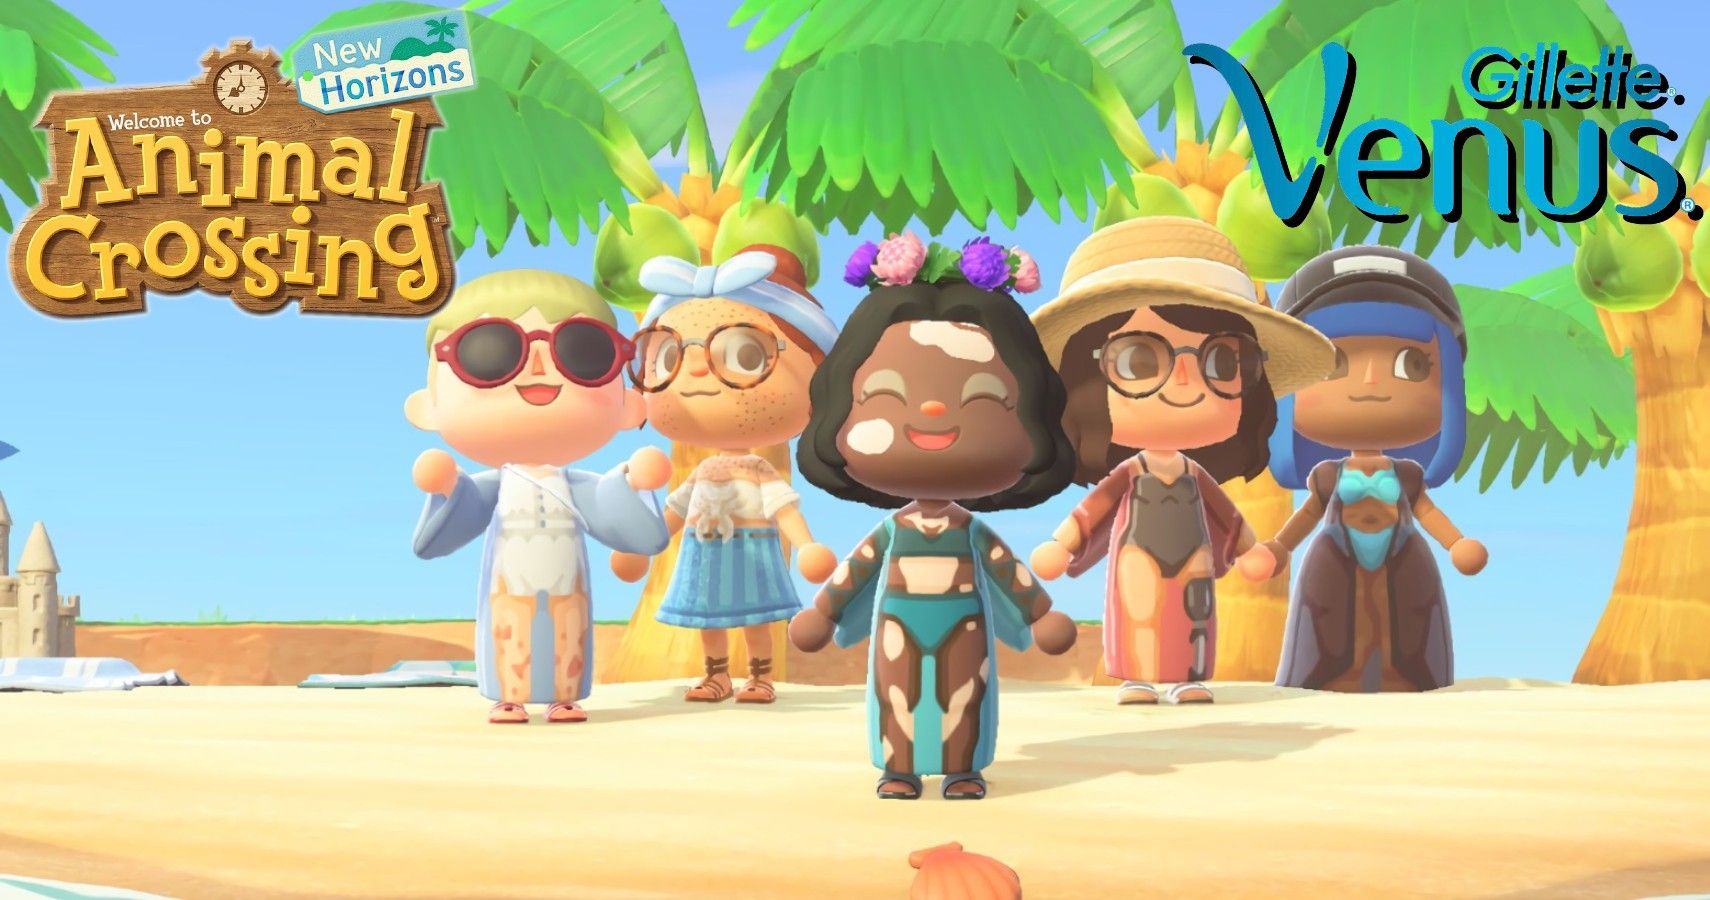 Gillette Venus Launches New Skinclusive Summer Line in Animal Crossing New Horizons